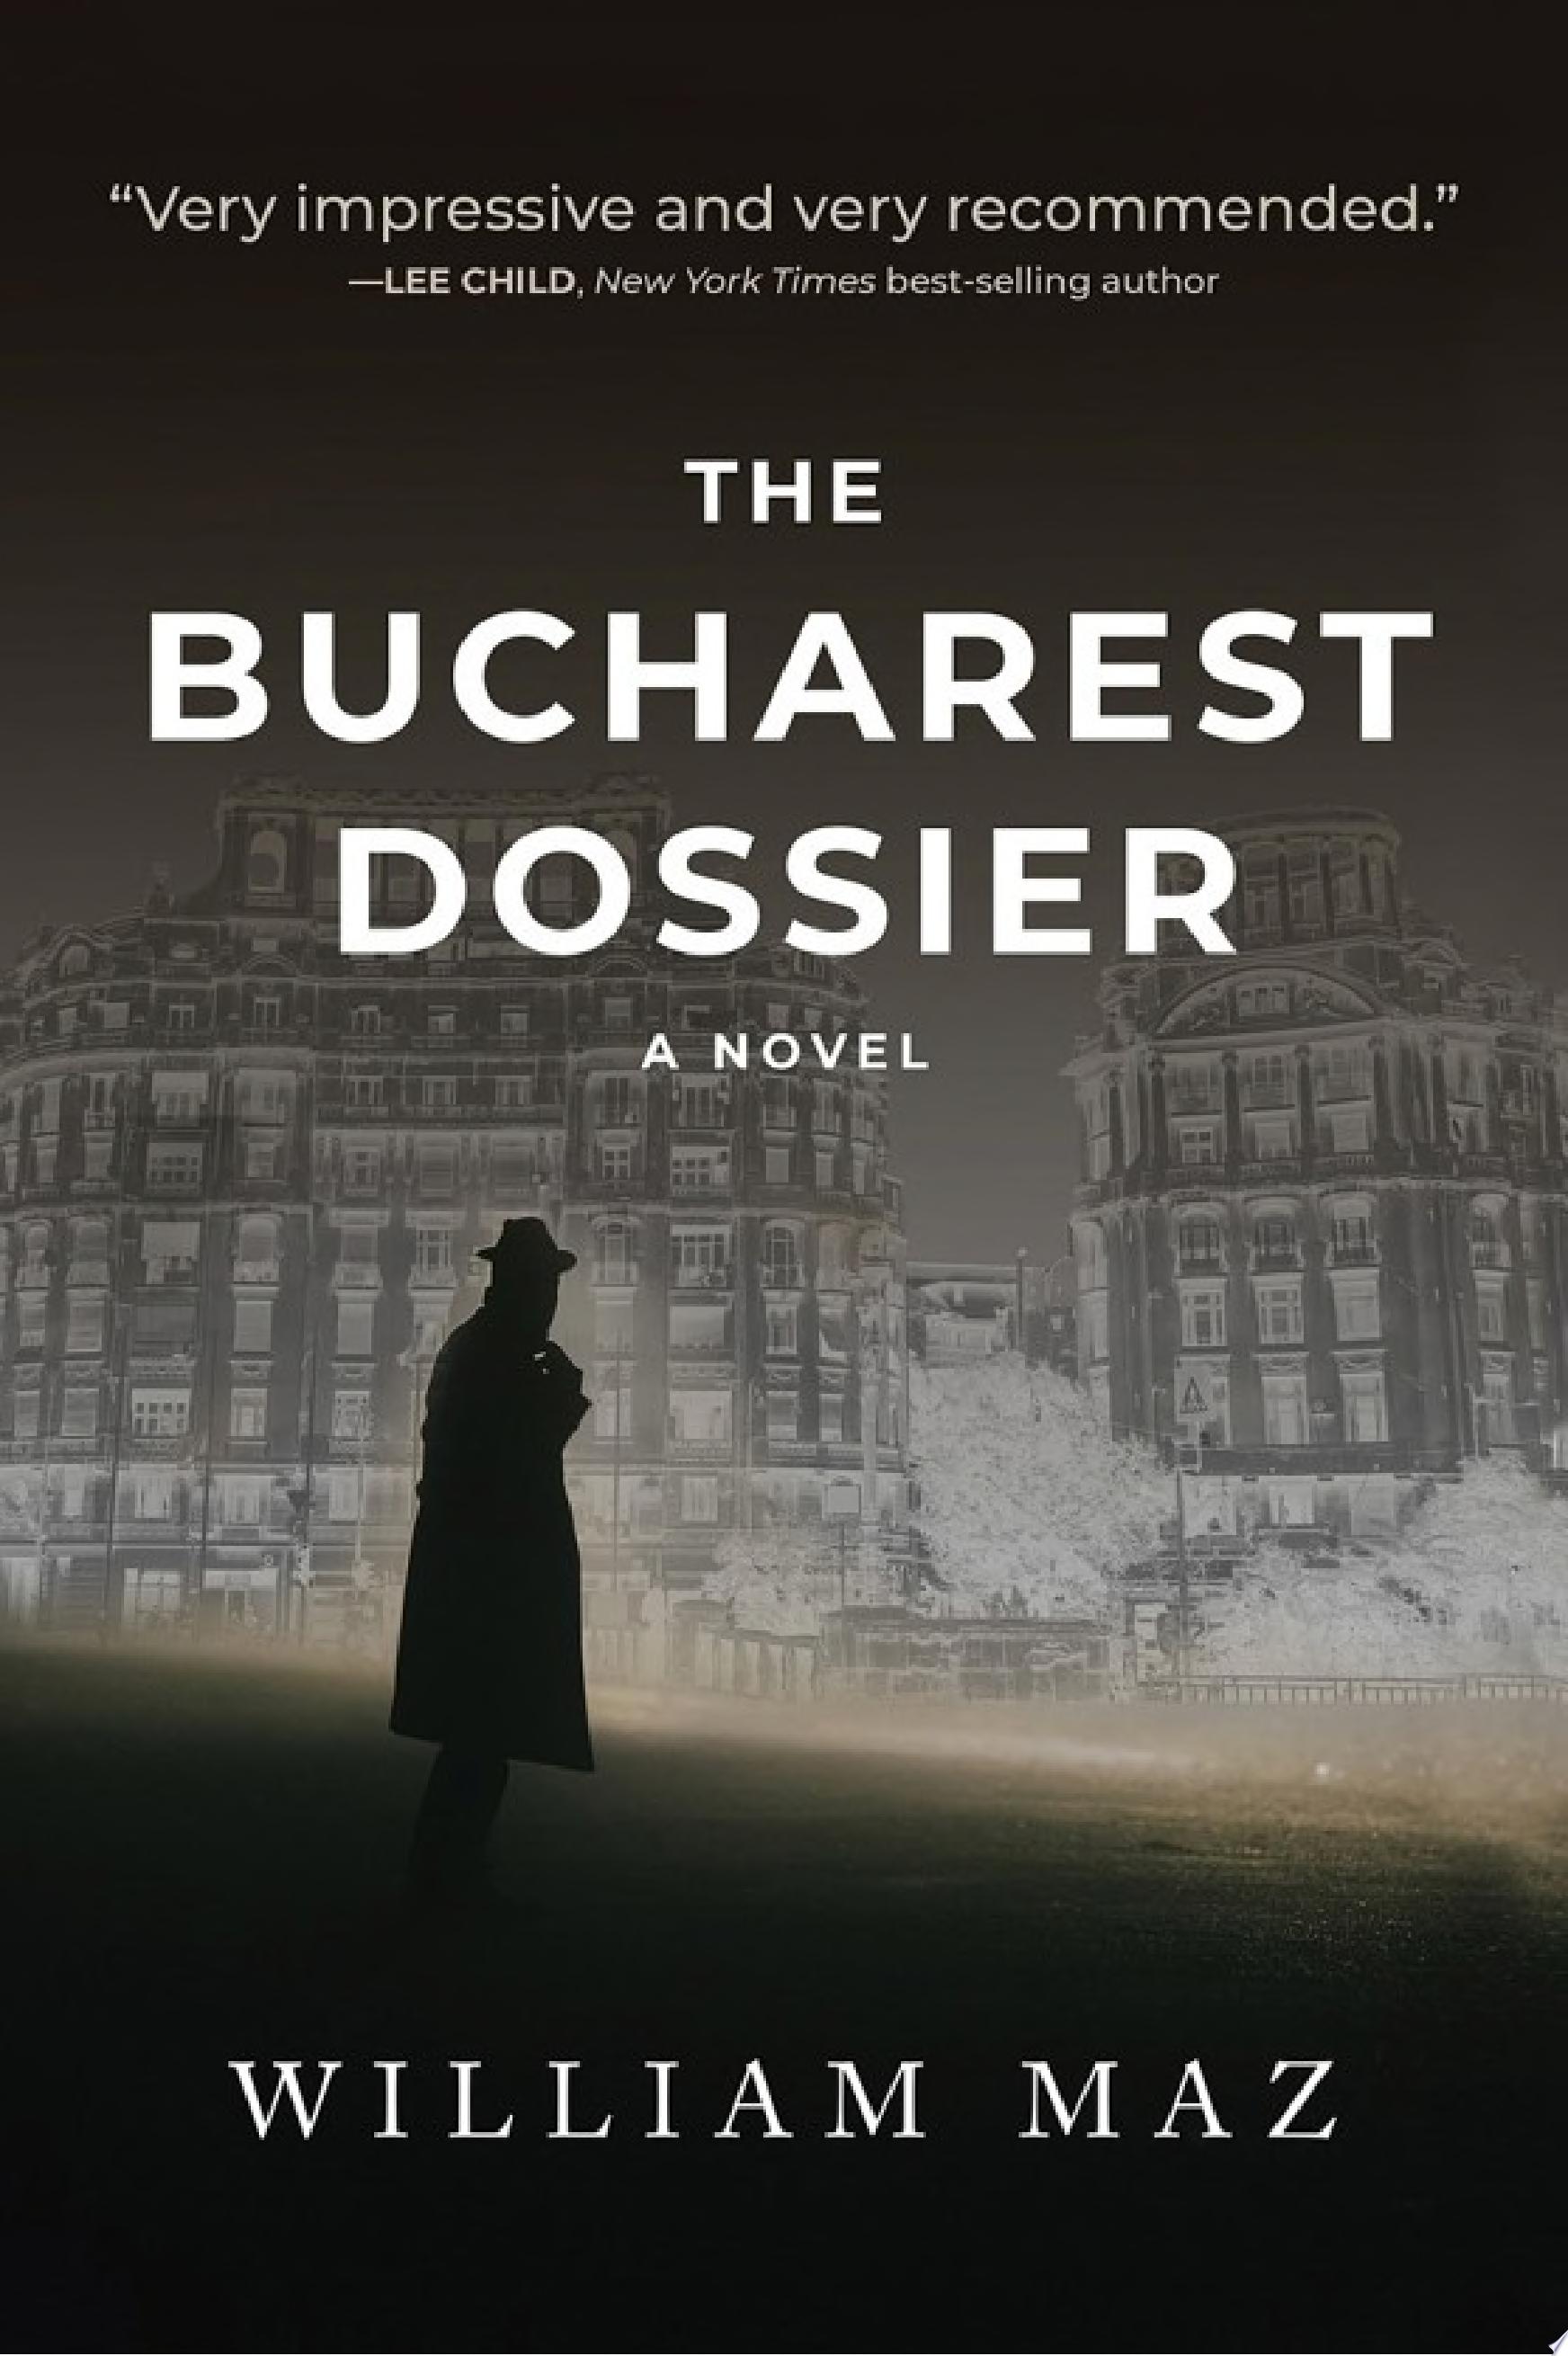 Image for "The Bucharest Dossier"